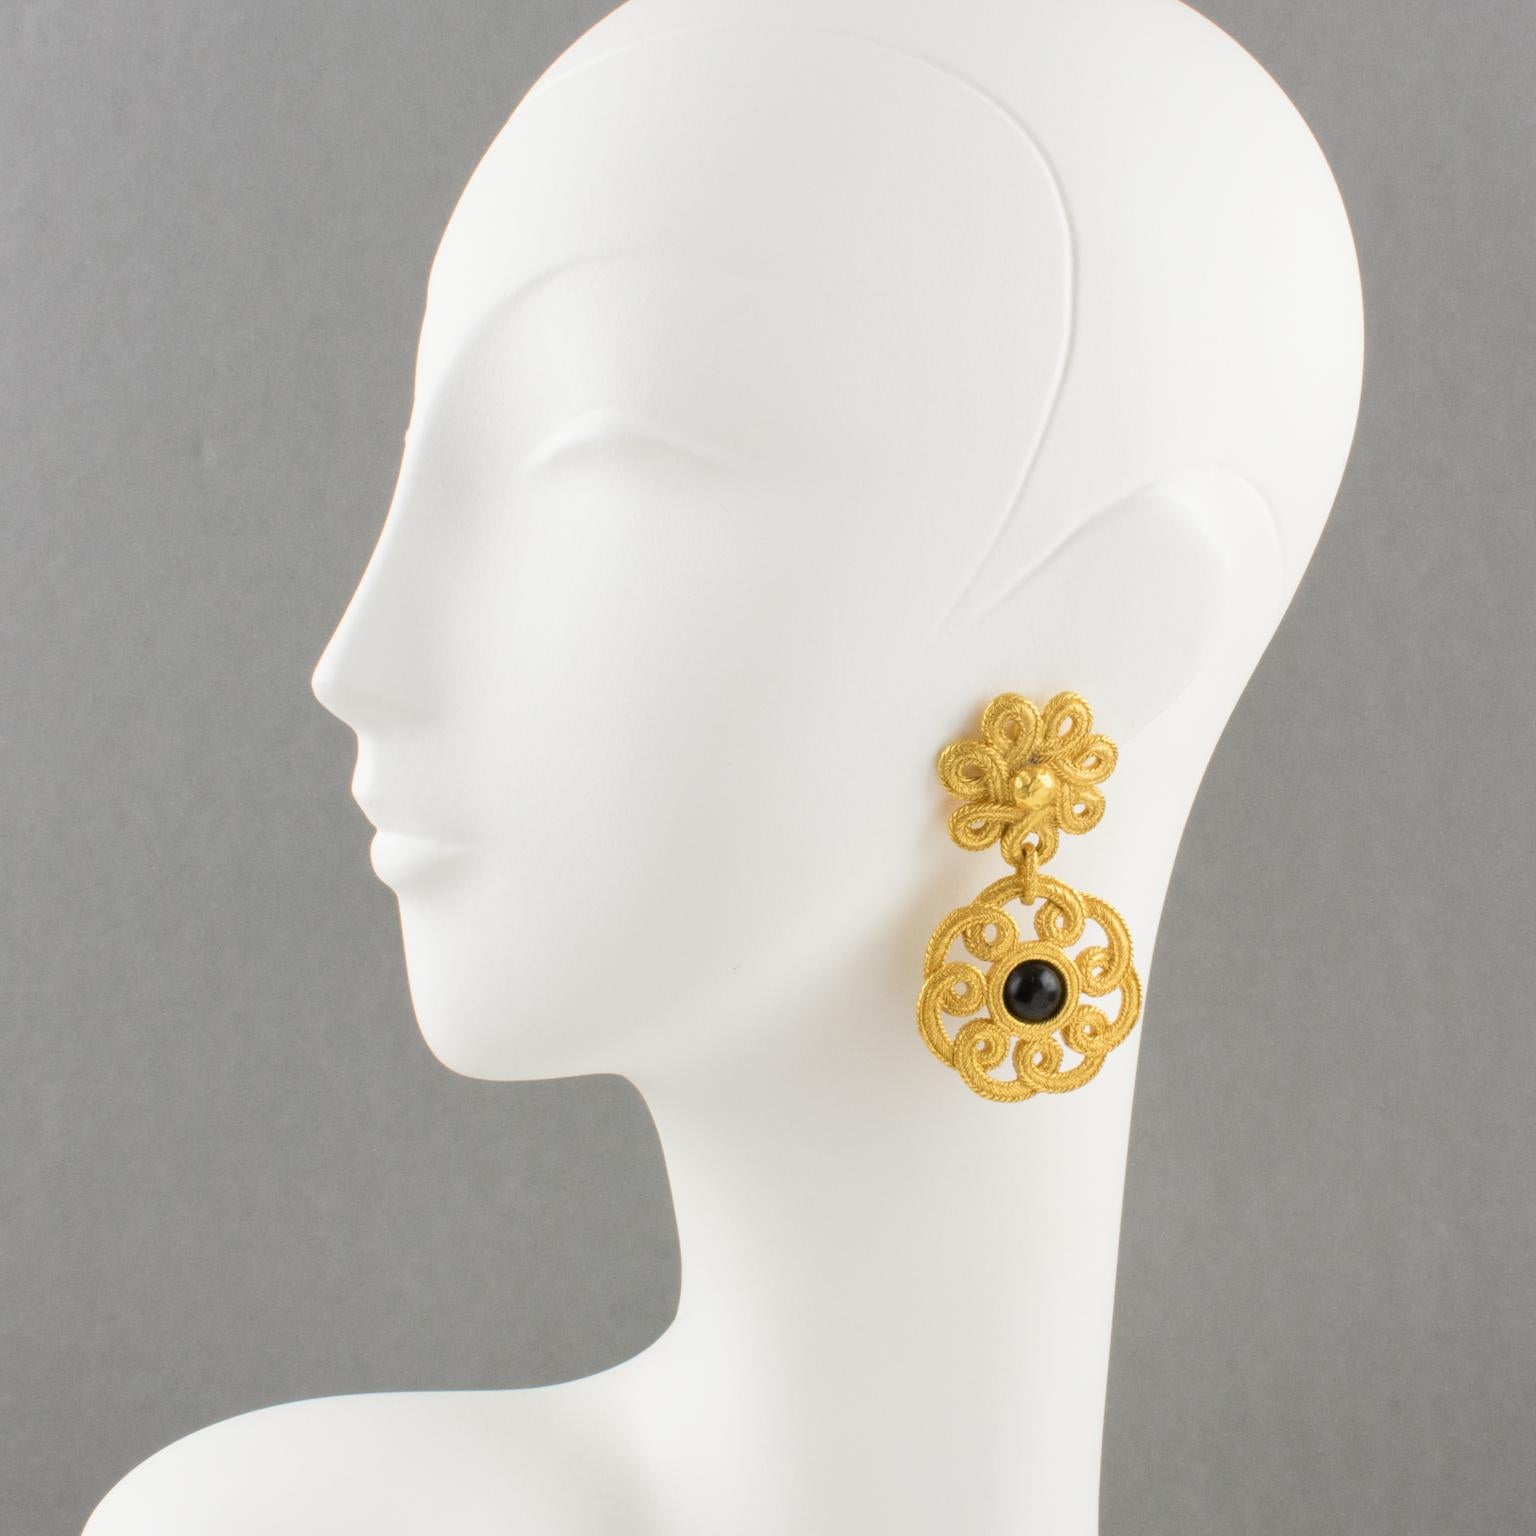 Elegant Emanuel Ungaro Paris signed clip-on earrings. Gilt metal floral dangling shape all textured and see-thru, topped with black resin cabochon. Signed with tag underside 